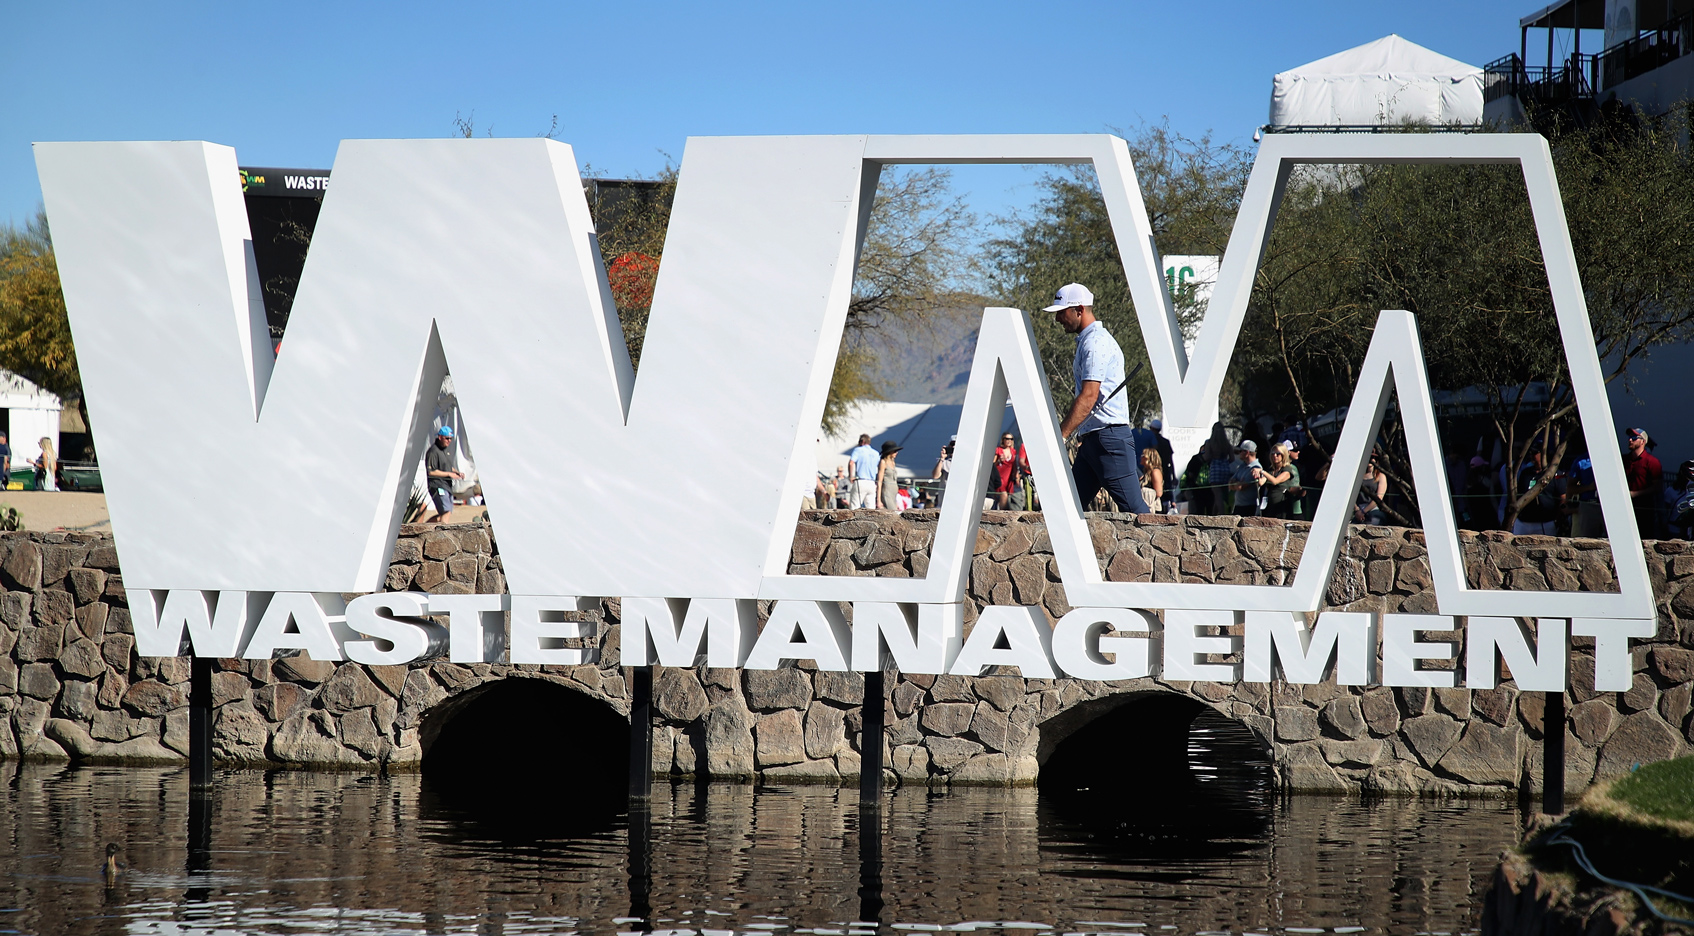 #GreenBucketList gives fans chance to win a VIP experience at 2022 WMPO